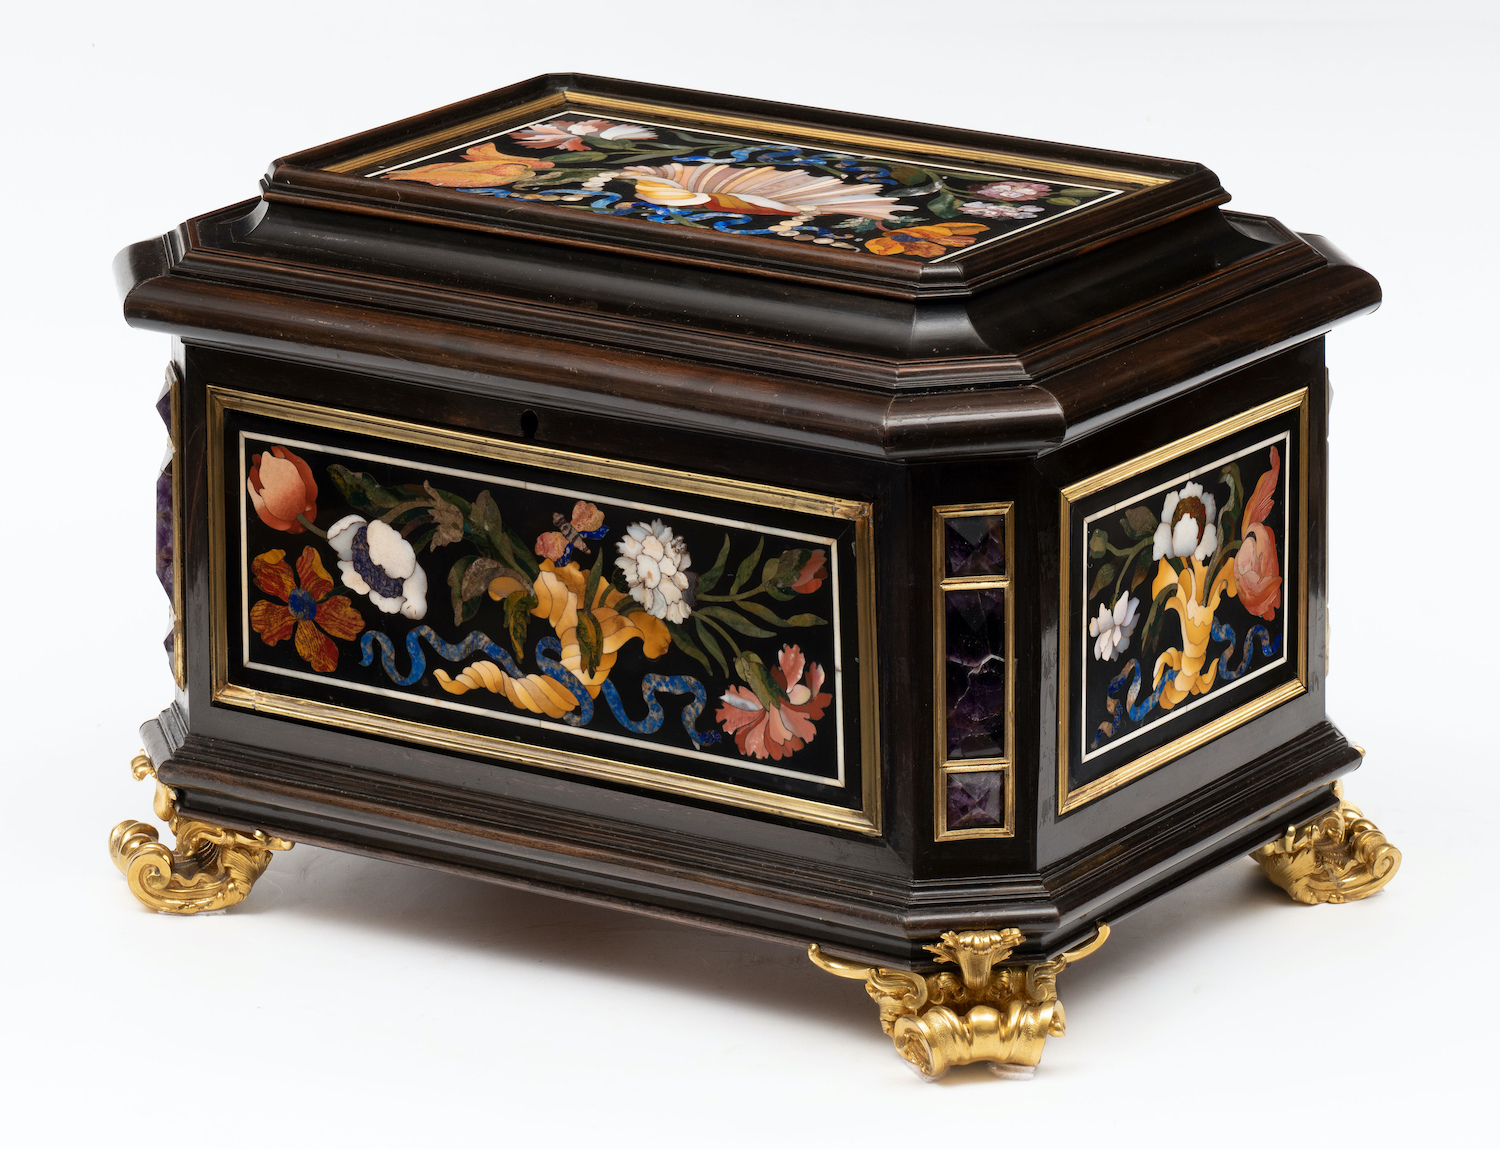 An Italian gilt-bronze and amethyst mounted pietre dure and ebony casket from the Grand Ducal Workshops